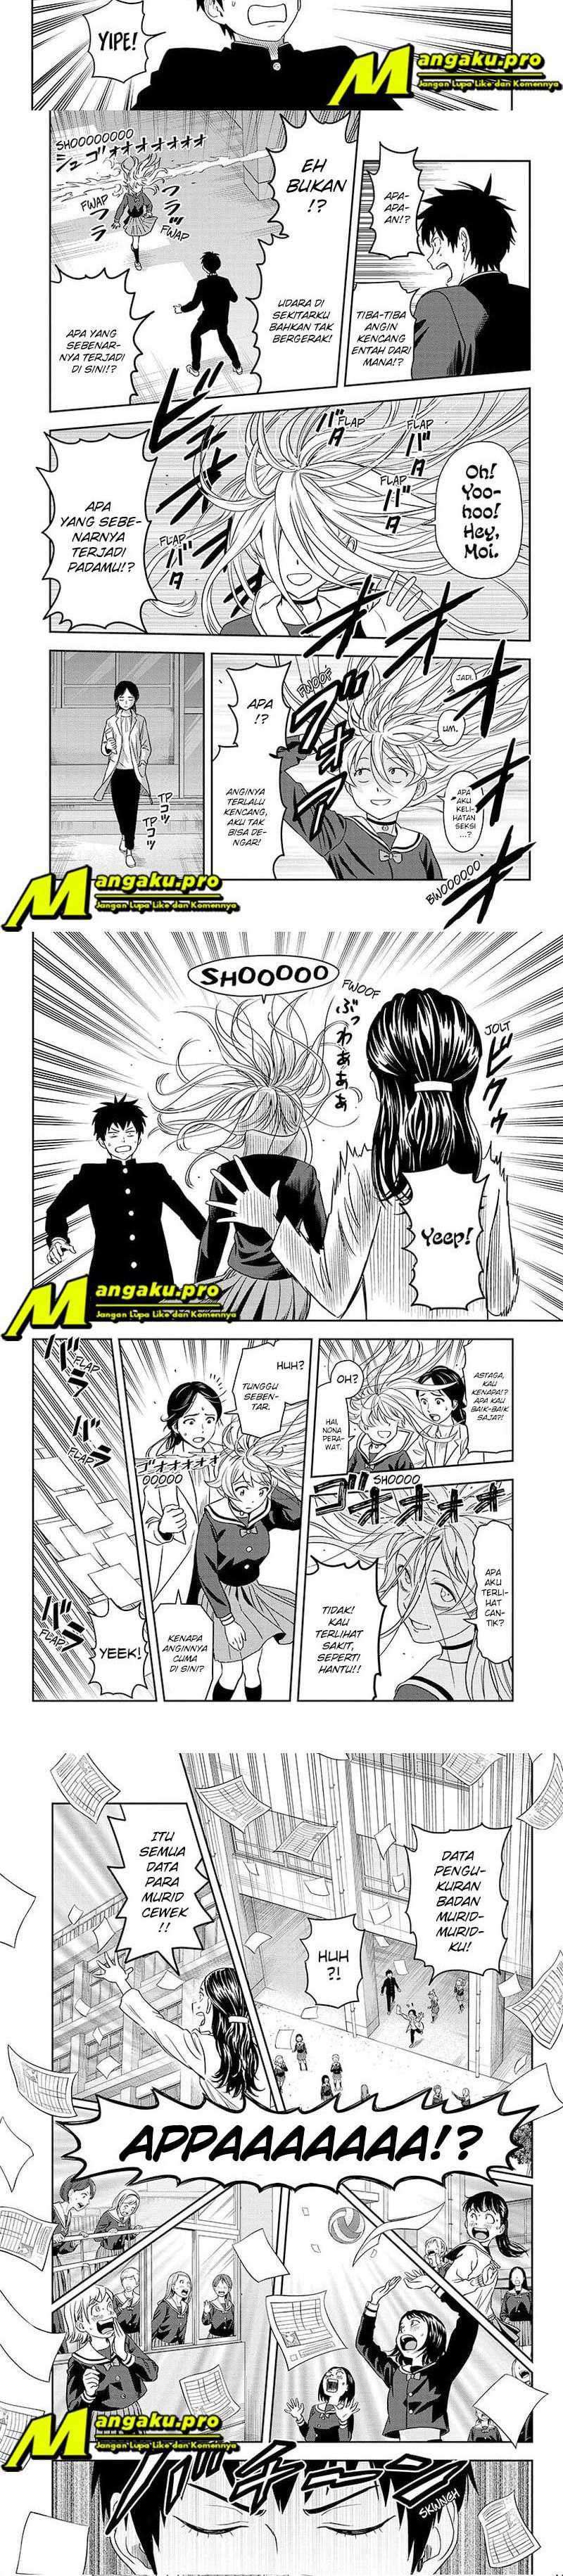 Witch Watch Chapter 12 5